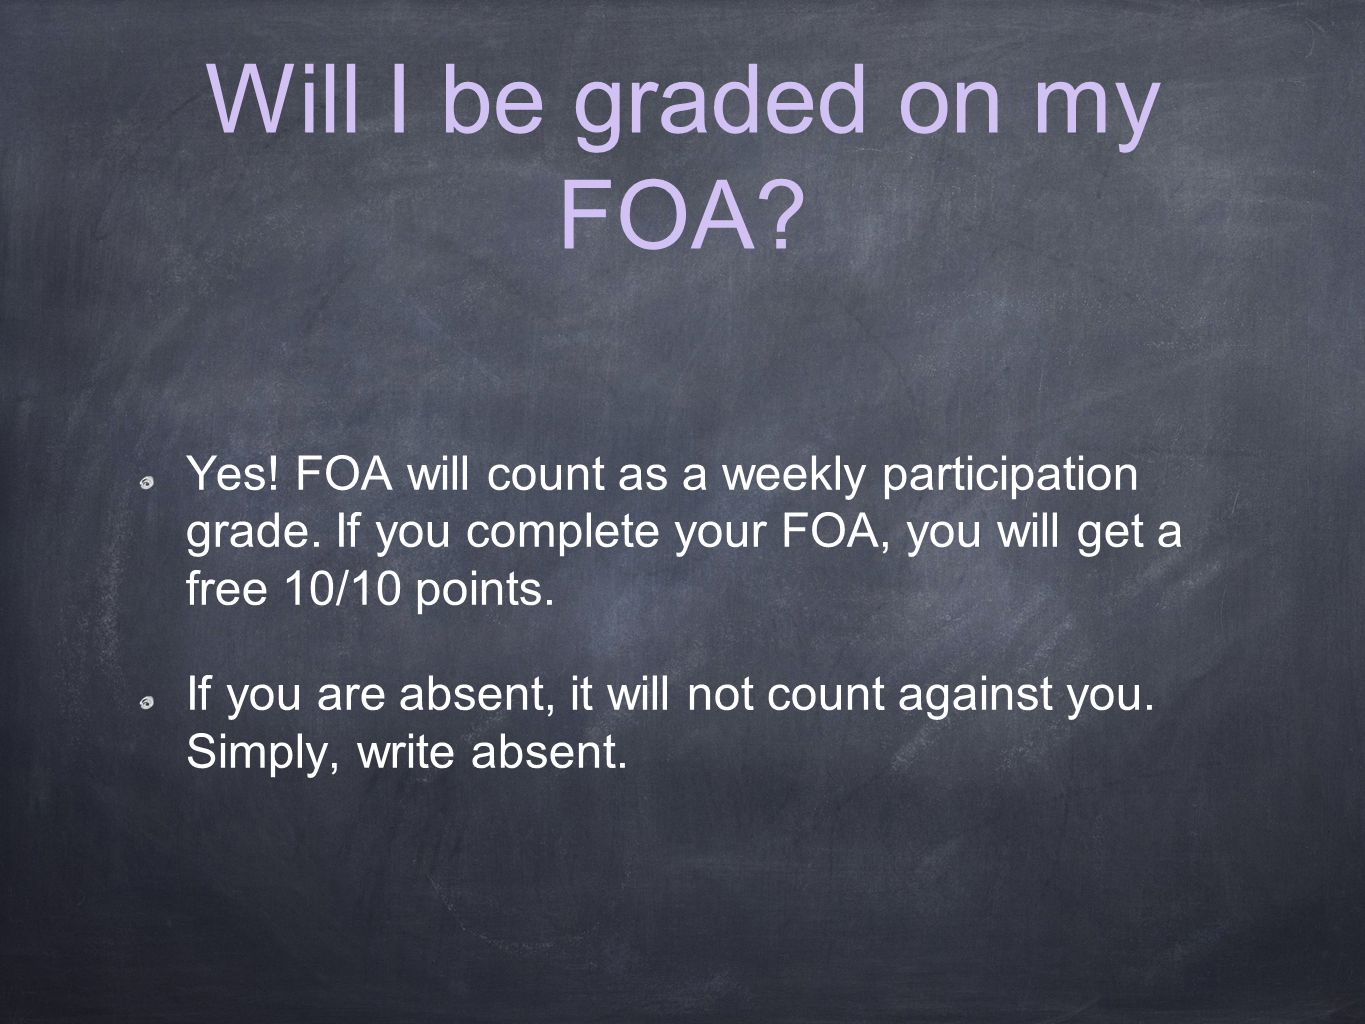 Will I be graded on my FOA. Yes. FOA will count as a weekly participation grade.